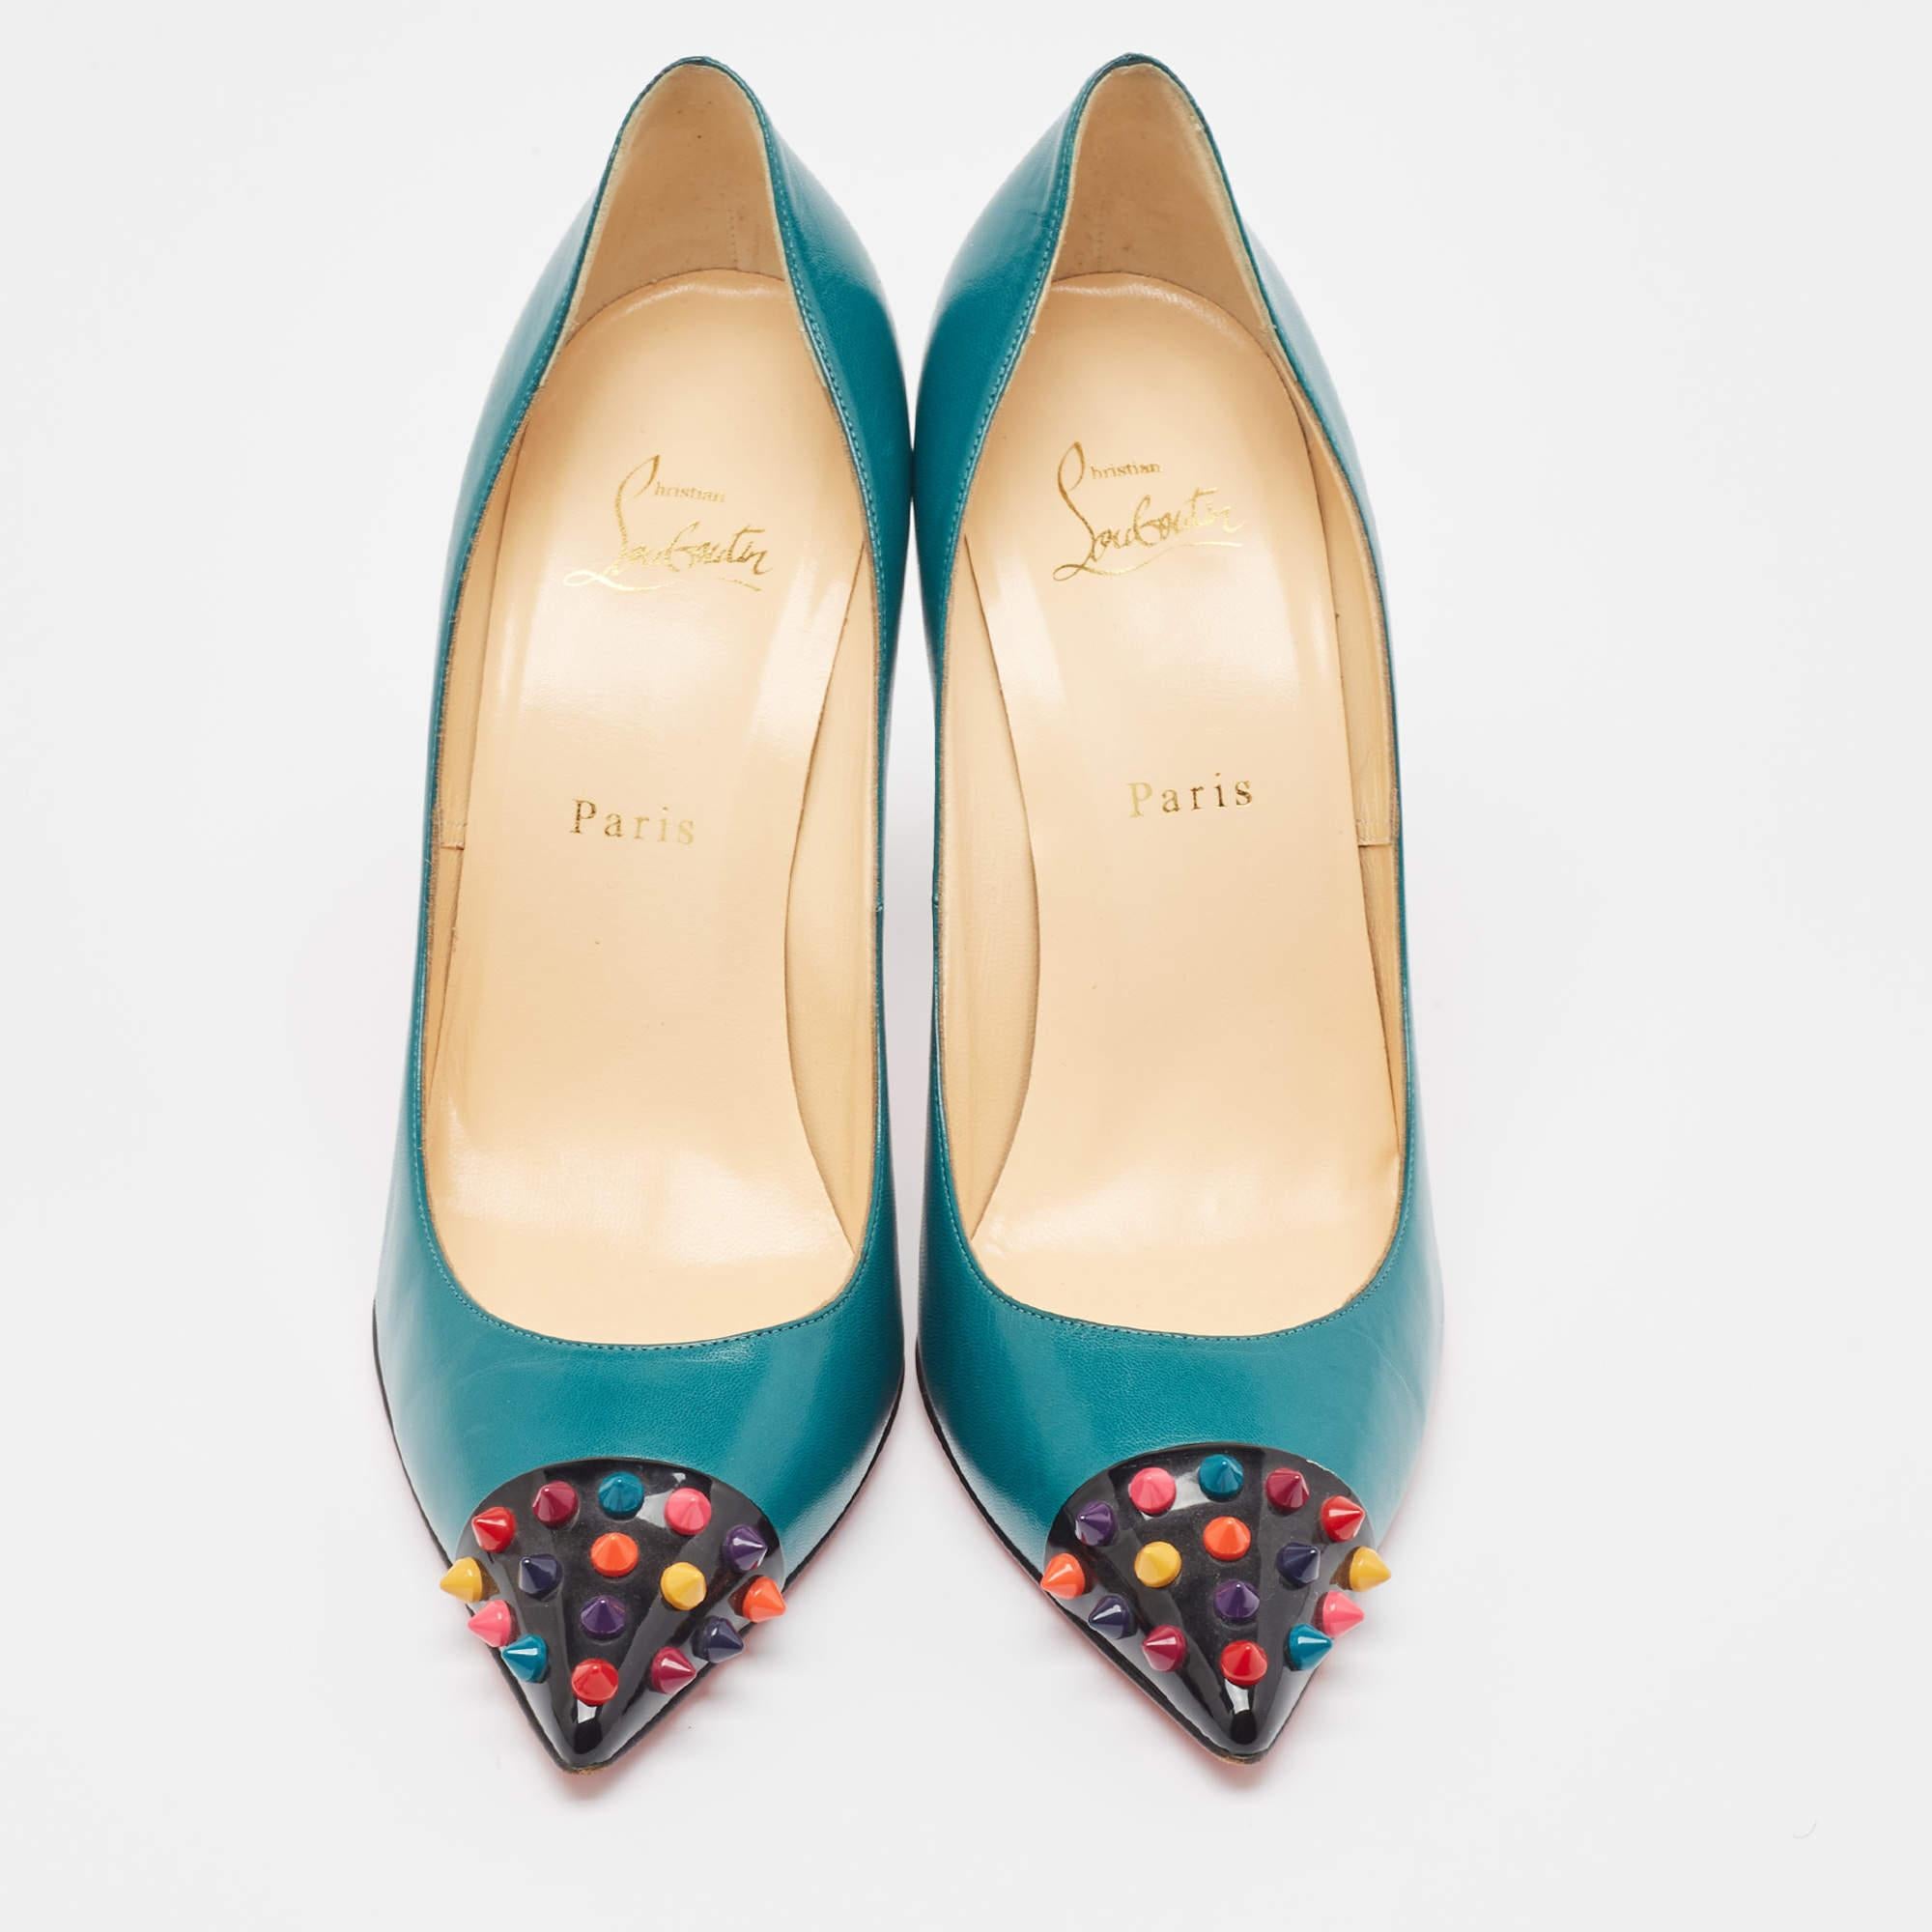 Be ready for praises and admirable gasps from your audience when you walk in these pumps from Christian Louboutin. Crafted from green leather, they carry pointed toes and spikes decorated on the cap toes. The pair is complete with 12cm heels, and